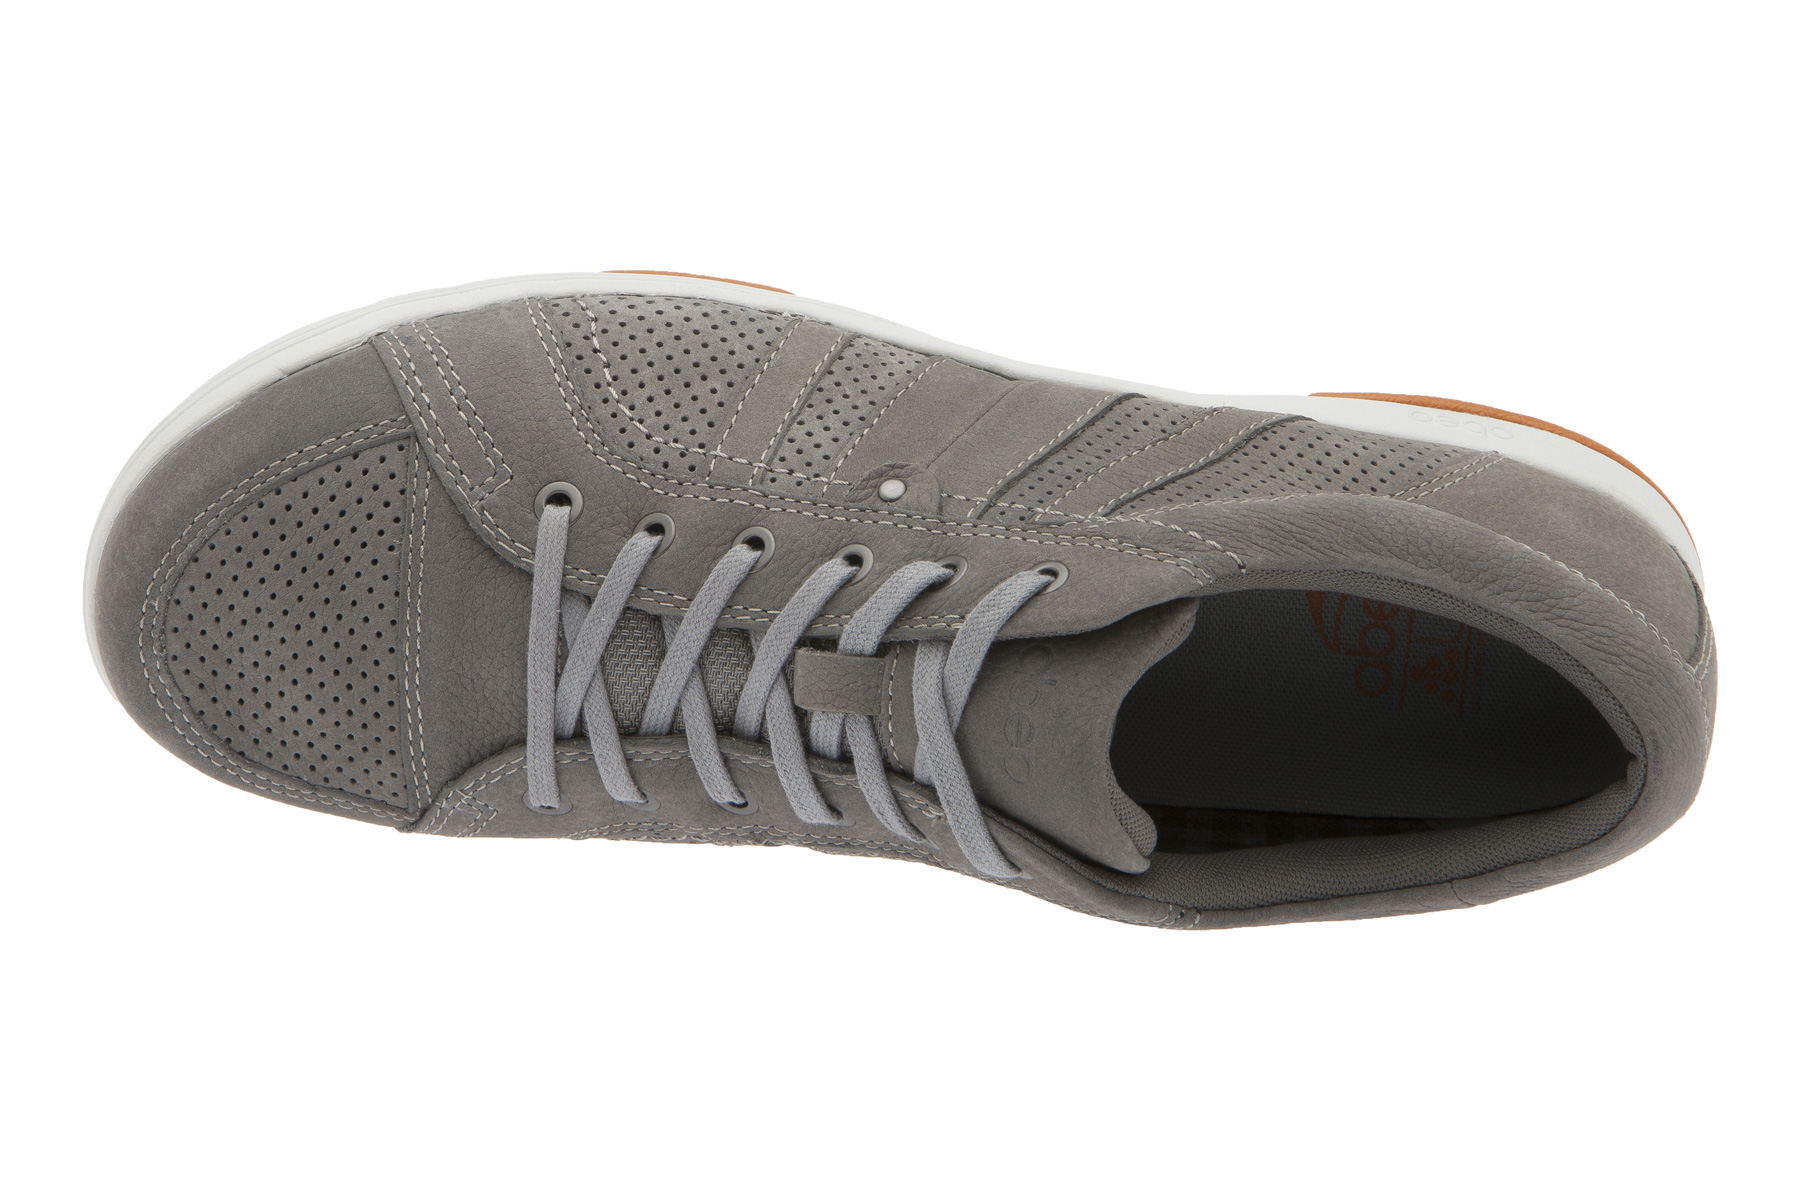 ABEO  Cort - Casual Shoes in Grey - image 2 of 6